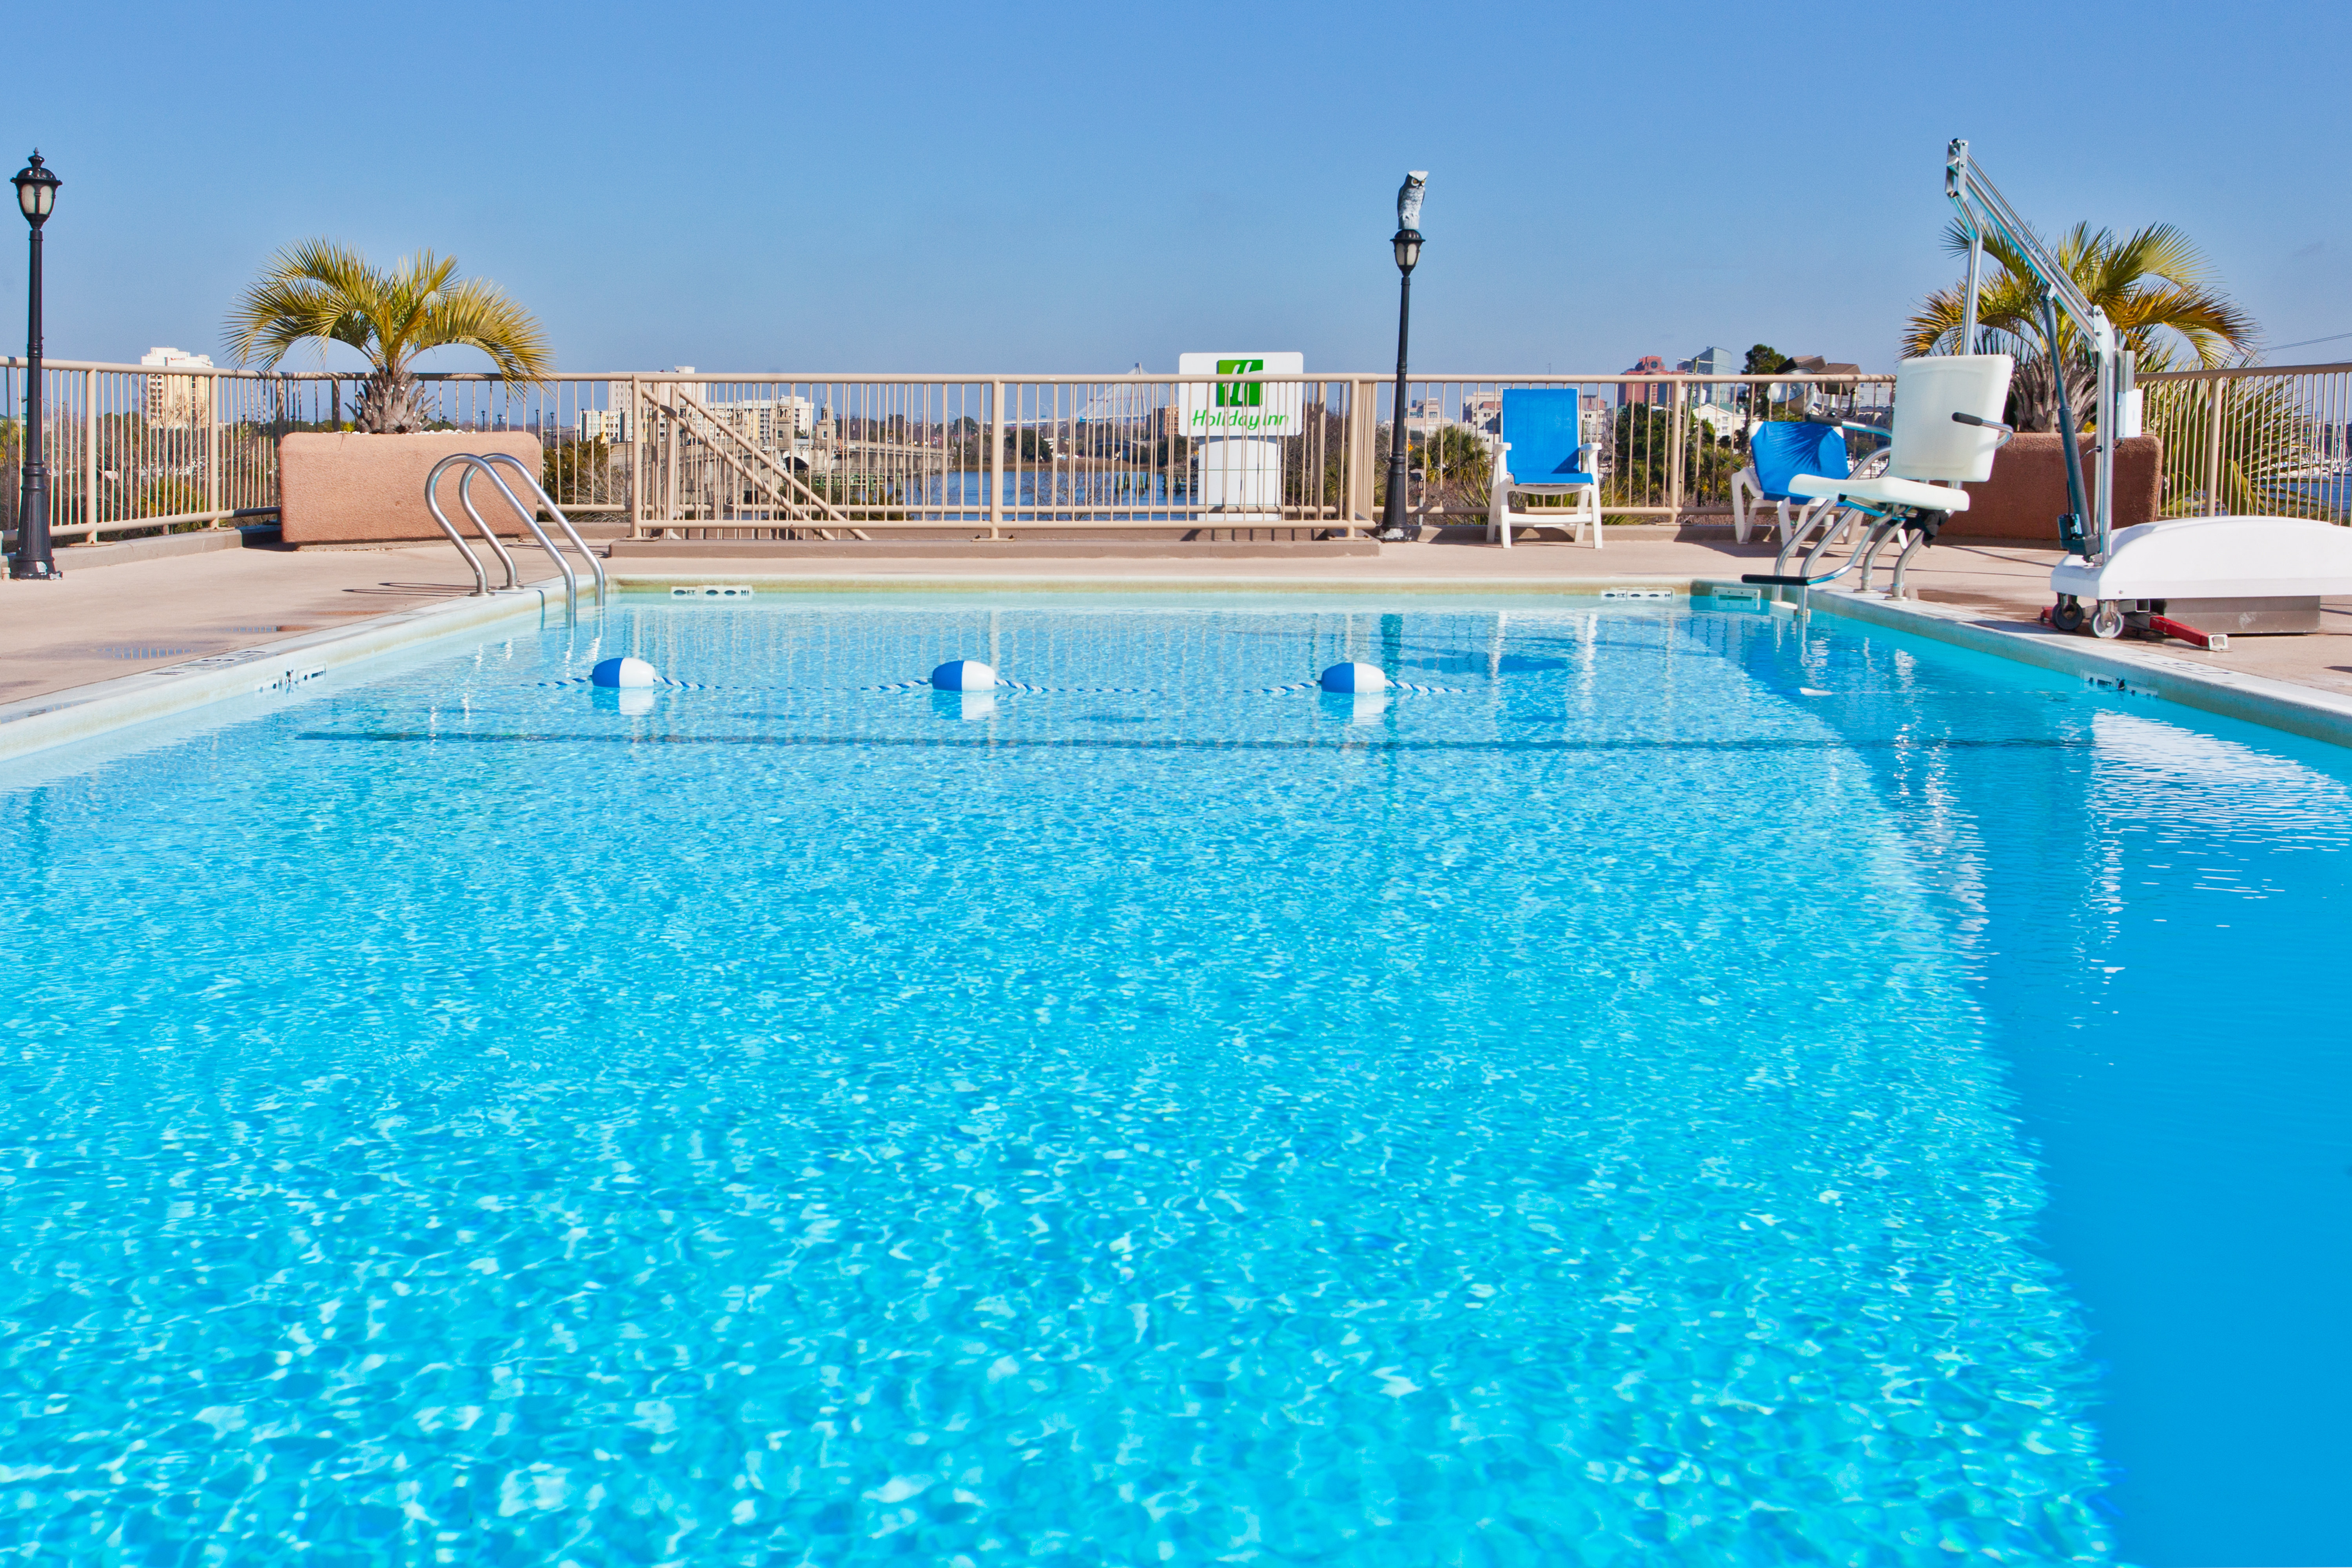 See the Charleston Harbor from the pool!